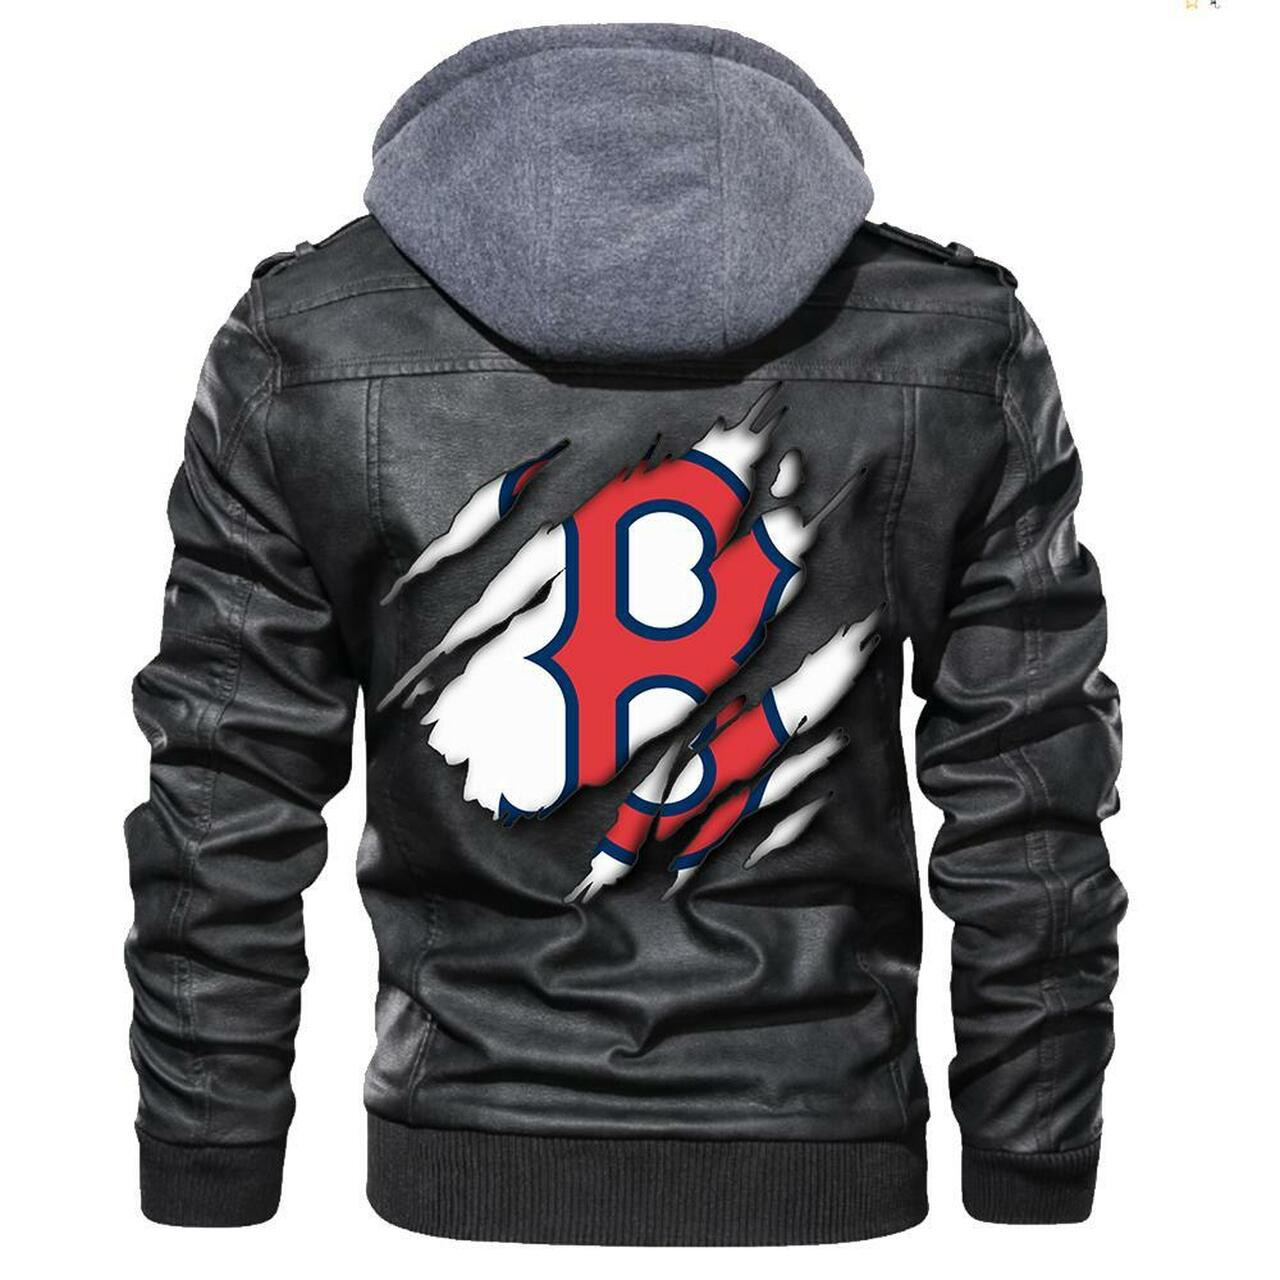 Top 200+ leather jacket so cool for your man 61